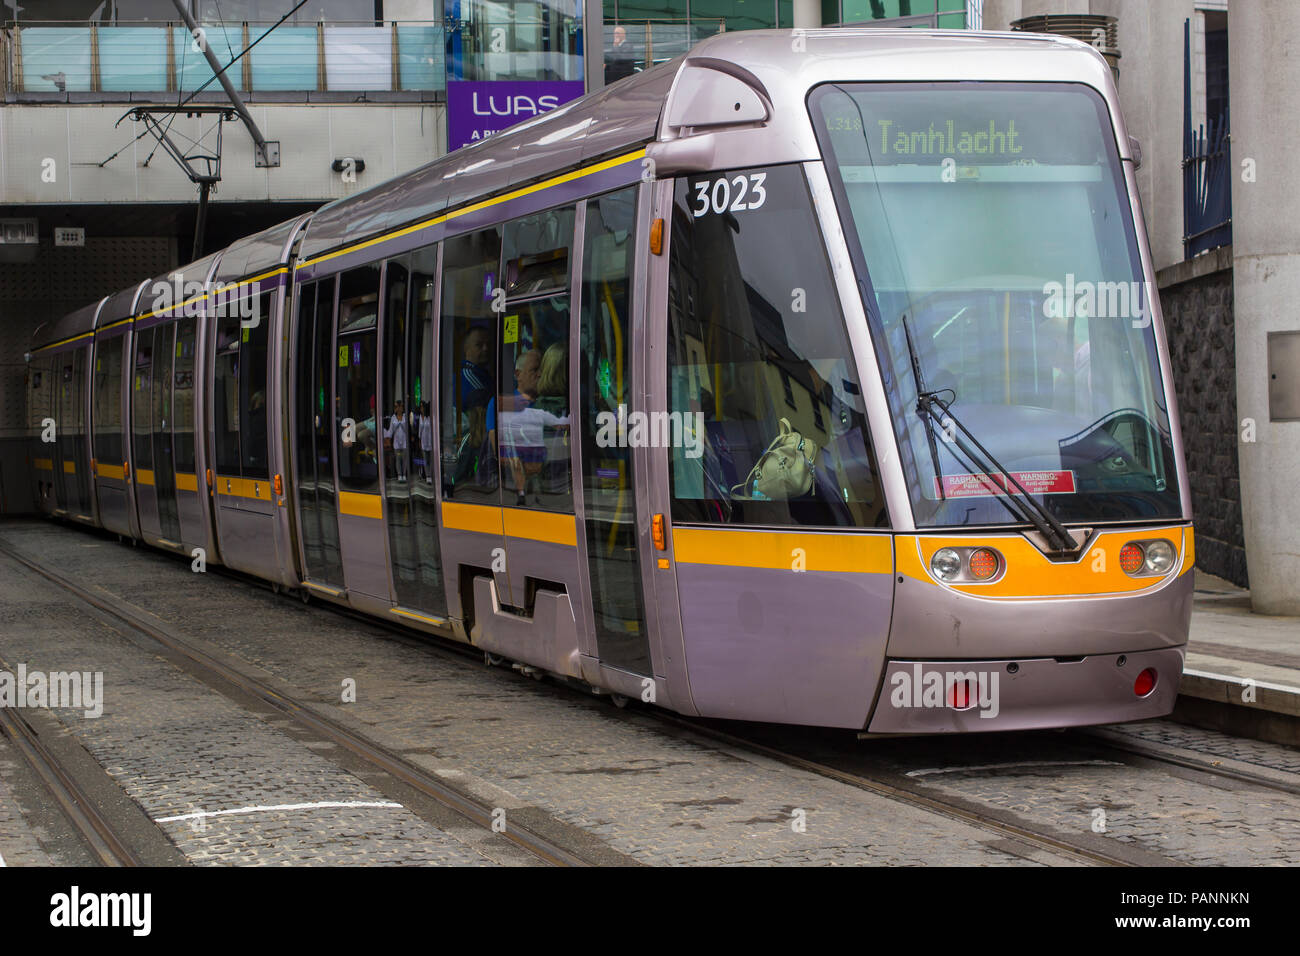 A Dublin Tram that is part of the very successful and efficient Luas city transport system waiting outside Connolly Rail Station Stock Photo